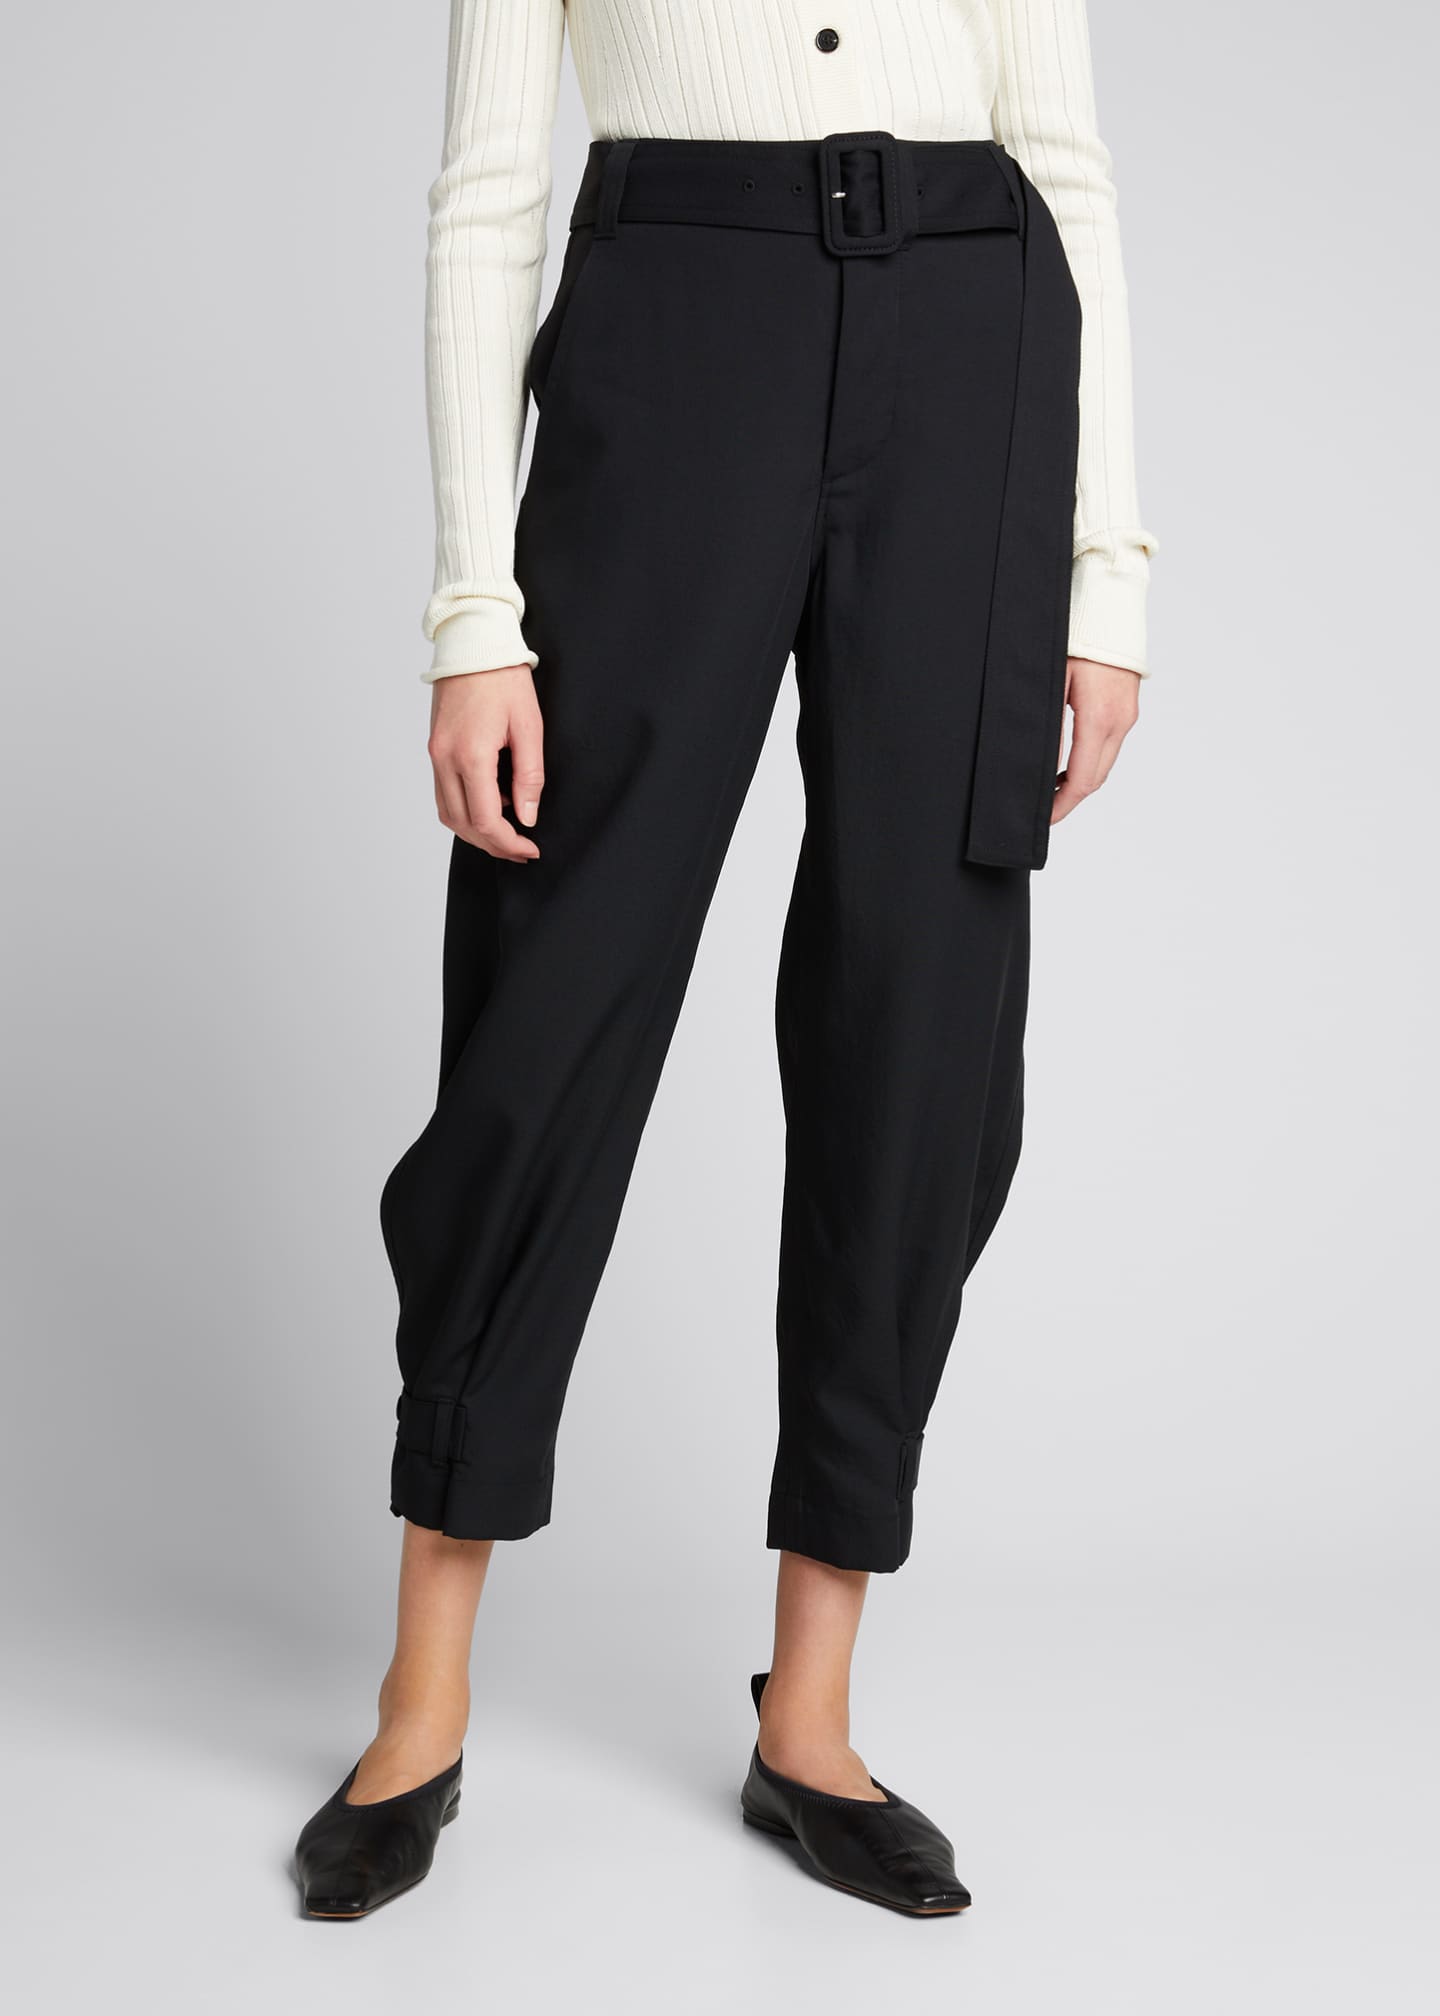 Proenza Schouler White Label Belted Rumple Pique Cropped Pants ...